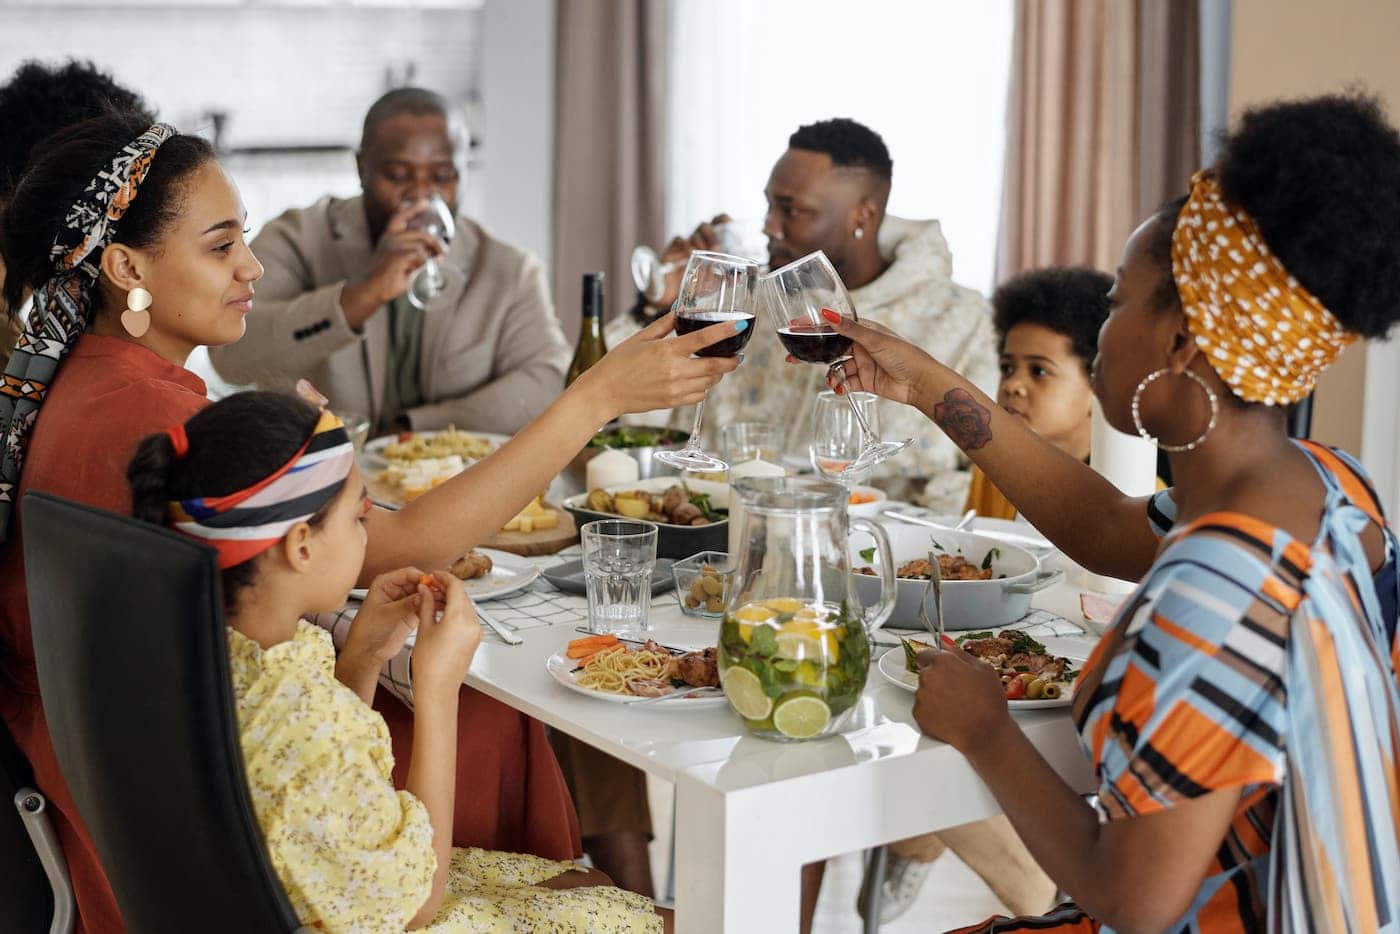 How enjoying meals with loved ones can reduce obesity